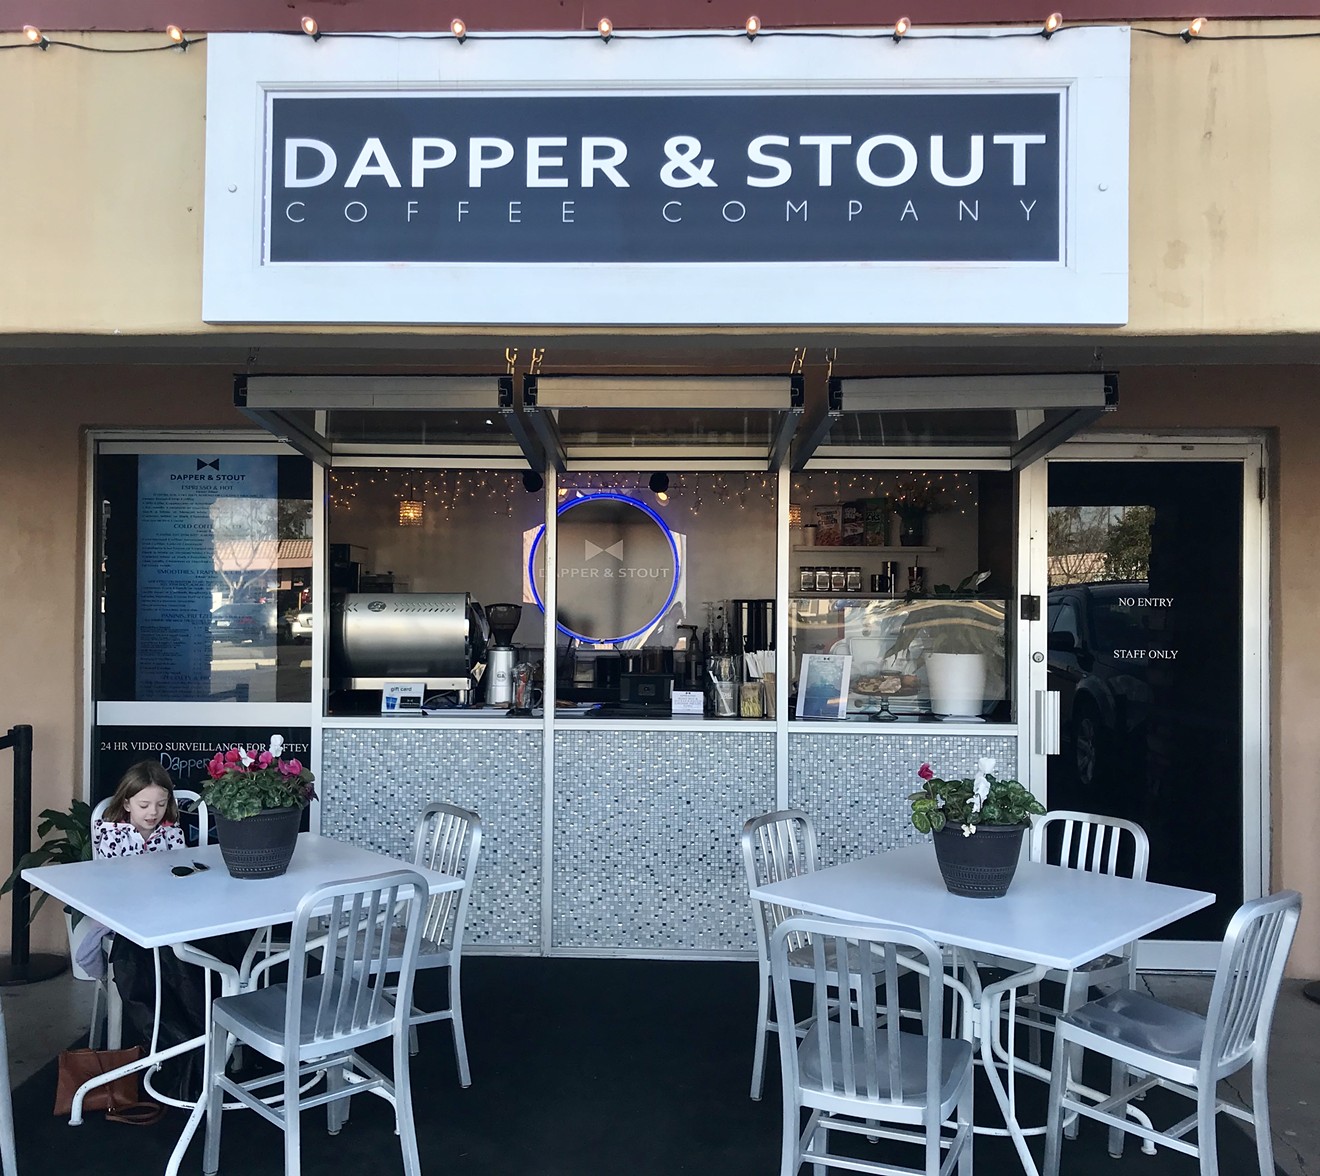 Dapper & Stout: A picture is worth a thousand square feet.